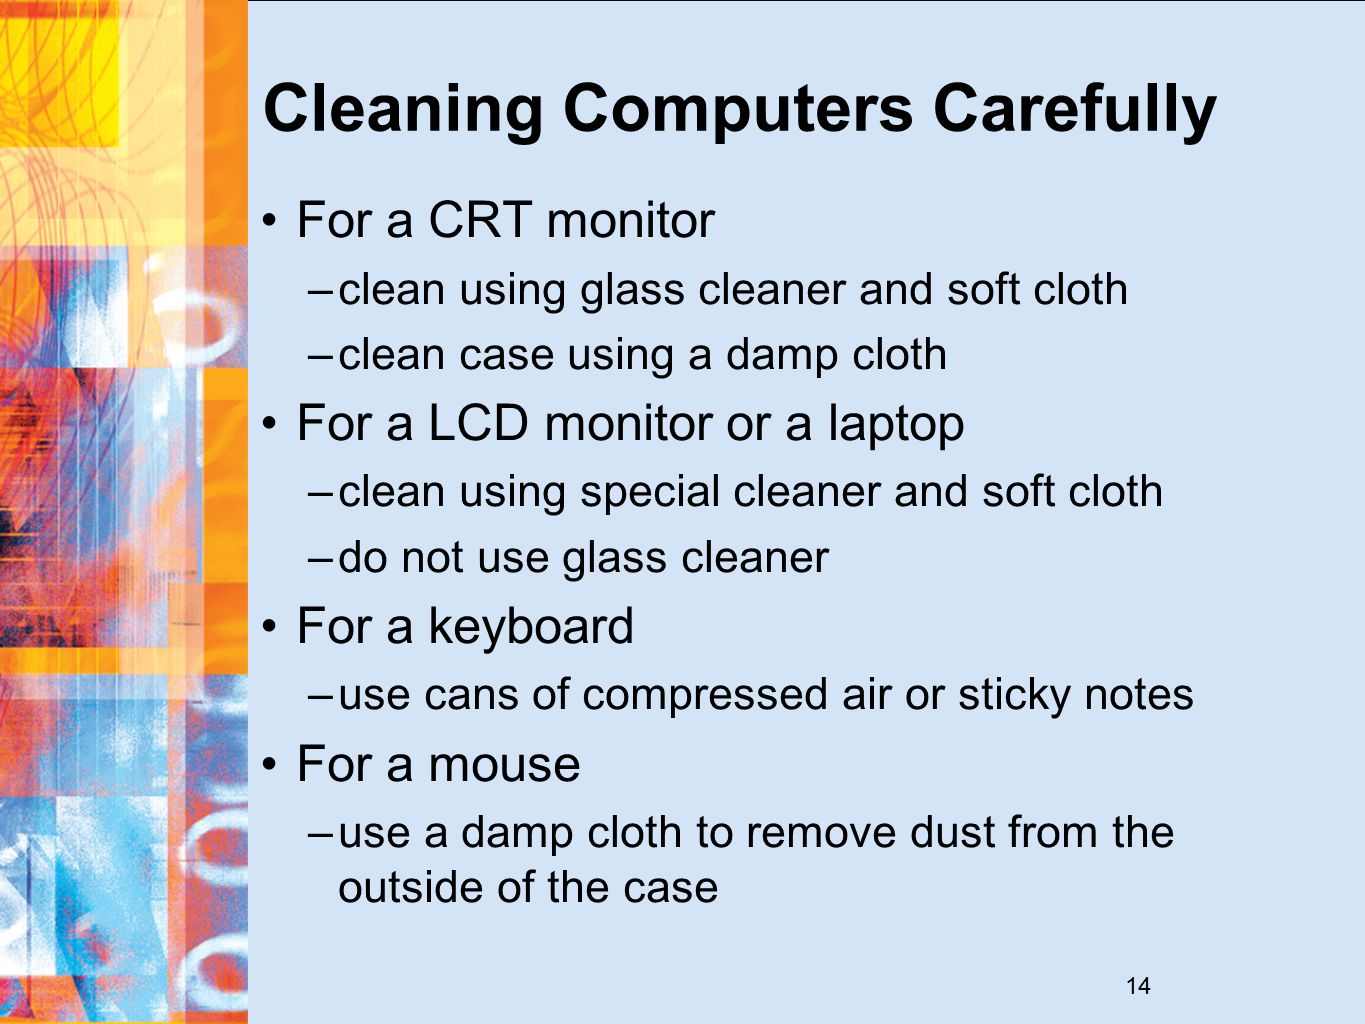 14 Cleaning Computers Carefully For a CRT monitor –clean using glass cleaner and soft cloth –clean case using a damp cloth For a LCD monitor or a laptop –clean using special cleaner and soft cloth –do not use glass cleaner For a keyboard –use cans of compressed air or sticky notes For a mouse –use a damp cloth to remove dust from the outside of the case